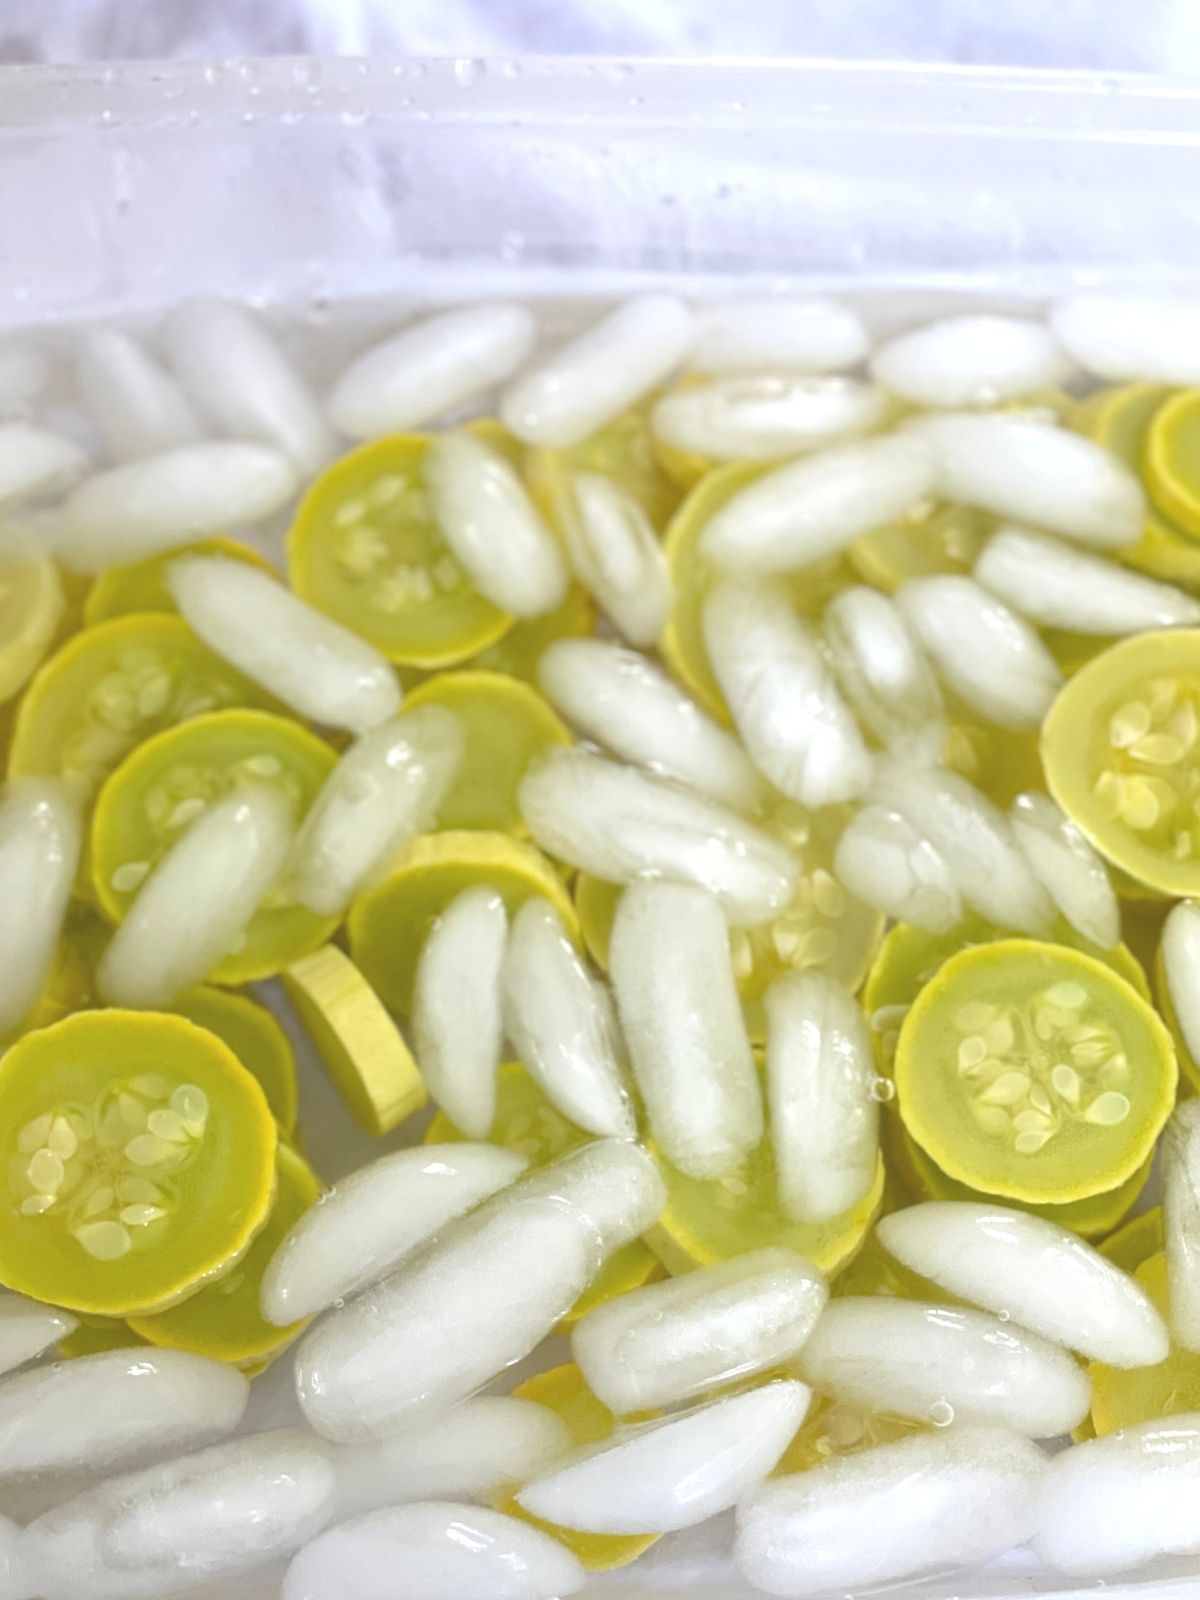 Blanched squash slices placed in an ice bath to cool. 